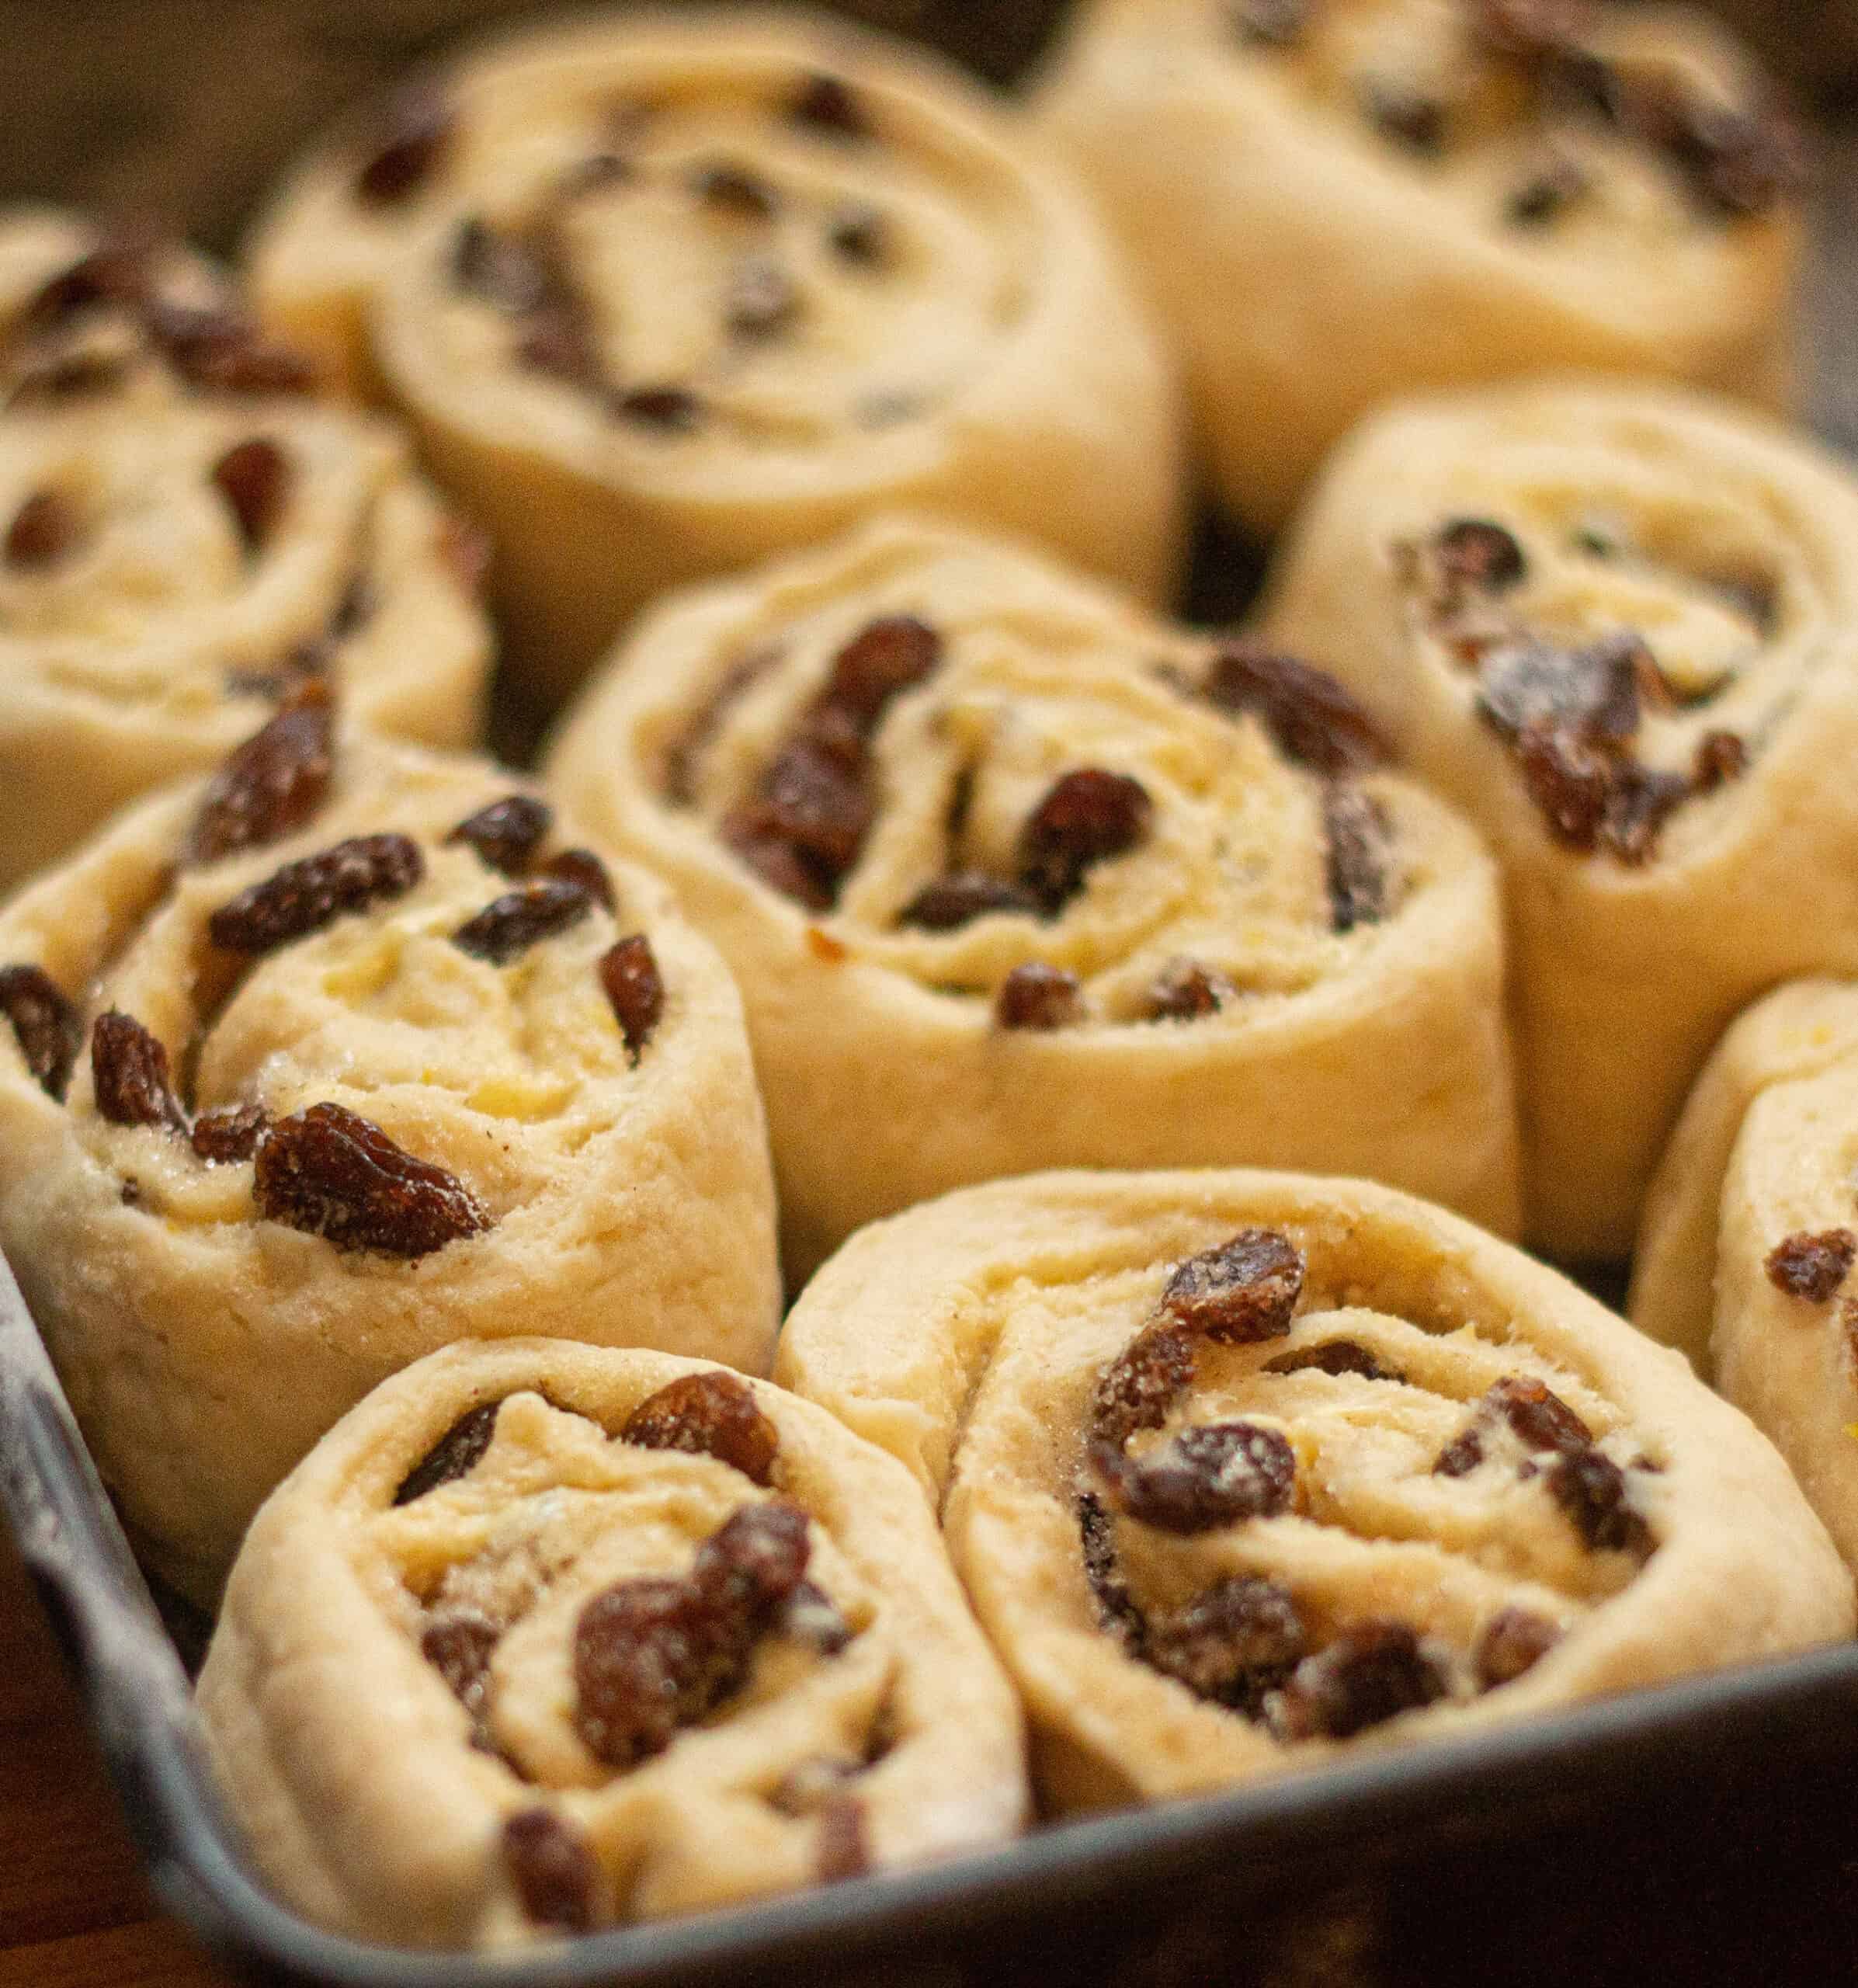 Rolled chelsea buns ready to bake